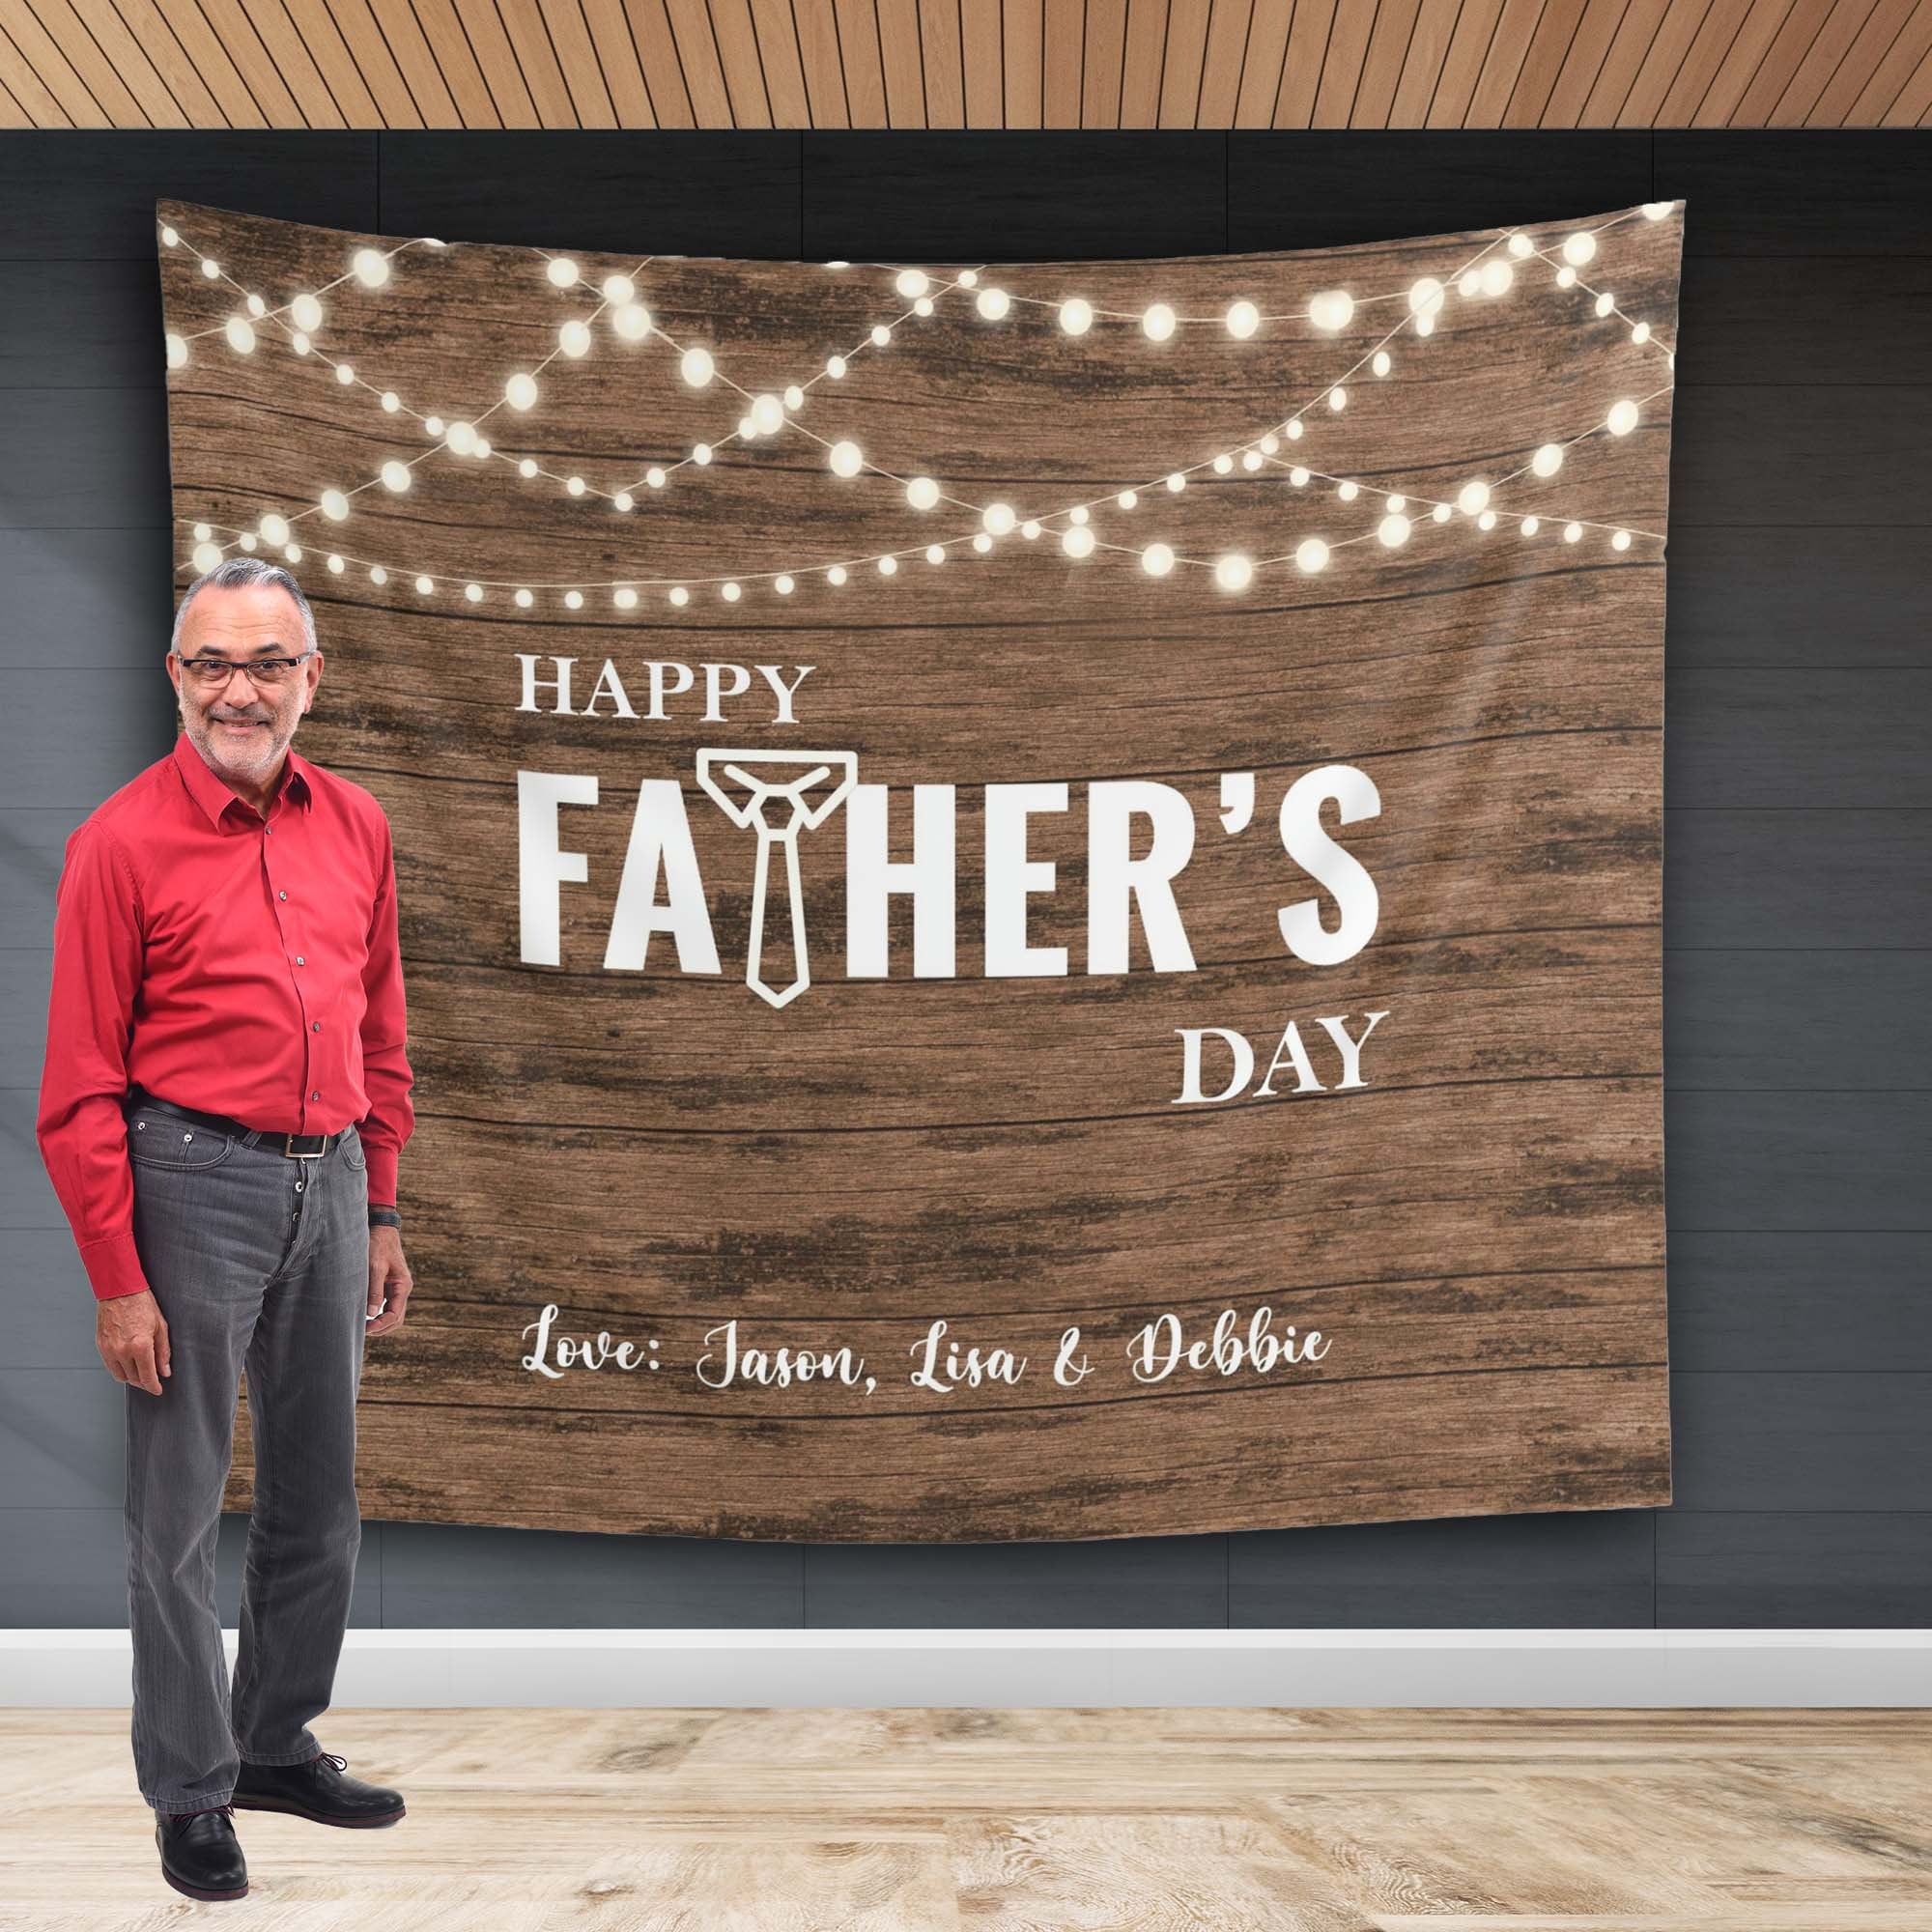 Rustic Happy Father's Day Backdrop Love Dad Decoration Family Festival Church PhotoBooth Banner Gold Glitter Thank You Daddy Decoration